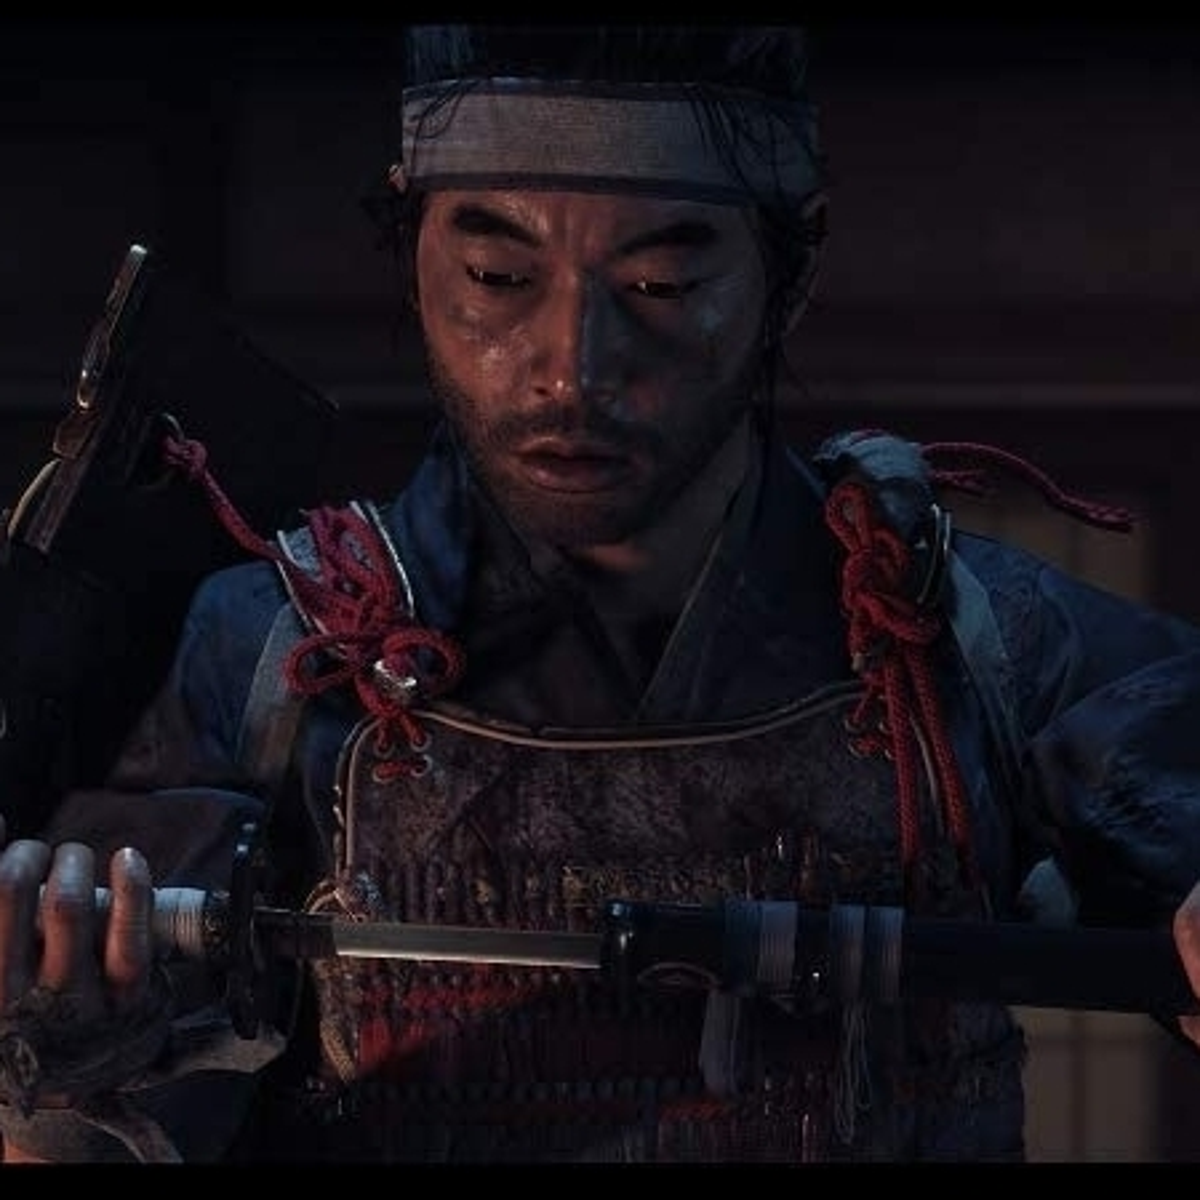 Ghost of Tsushima: Director's Cut rating spotted for PS4 and PS5